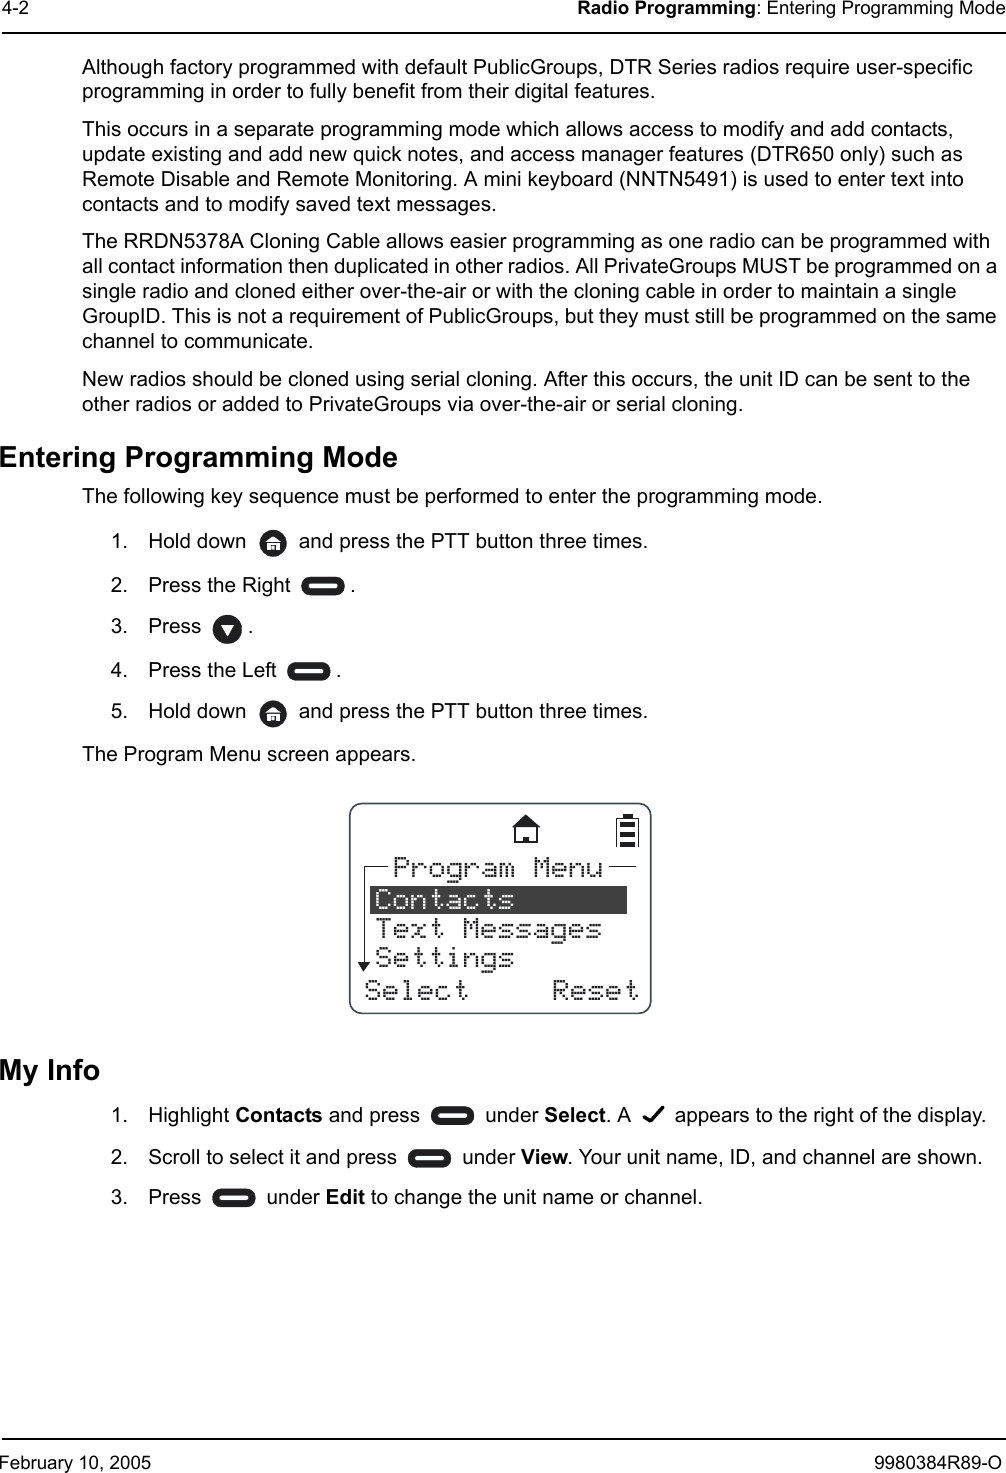 February 10, 2005 9980384R89-O4-2 Radio Programming: Entering Programming ModeAlthough factory programmed with default PublicGroups, DTR Series radios require user-specific programming in order to fully benefit from their digital features. This occurs in a separate programming mode which allows access to modify and add contacts, update existing and add new quick notes, and access manager features (DTR650 only) such as Remote Disable and Remote Monitoring. A mini keyboard (NNTN5491) is used to enter text into contacts and to modify saved text messages.The RRDN5378A Cloning Cable allows easier programming as one radio can be programmed with all contact information then duplicated in other radios. All PrivateGroups MUST be programmed on a single radio and cloned either over-the-air or with the cloning cable in order to maintain a single GroupID. This is not a requirement of PublicGroups, but they must still be programmed on the same channel to communicate. New radios should be cloned using serial cloning. After this occurs, the unit ID can be sent to the other radios or added to PrivateGroups via over-the-air or serial cloning.Entering Programming ModeThe following key sequence must be performed to enter the programming mode.1. Hold down   and press the PTT button three times.2. Press the Right  .3. Press .4. Press the Left  .5. Hold down   and press the PTT button three times.The Program Menu screen appears.My Info1. Highlight Contacts and press   under Select. A   appears to the right of the display.2. Scroll to select it and press   under View. Your unit name, ID, and channel are shown.3. Press  under Edit to change the unit name or channel.SelectProgram MenuContactsText MessagesSettingsReset